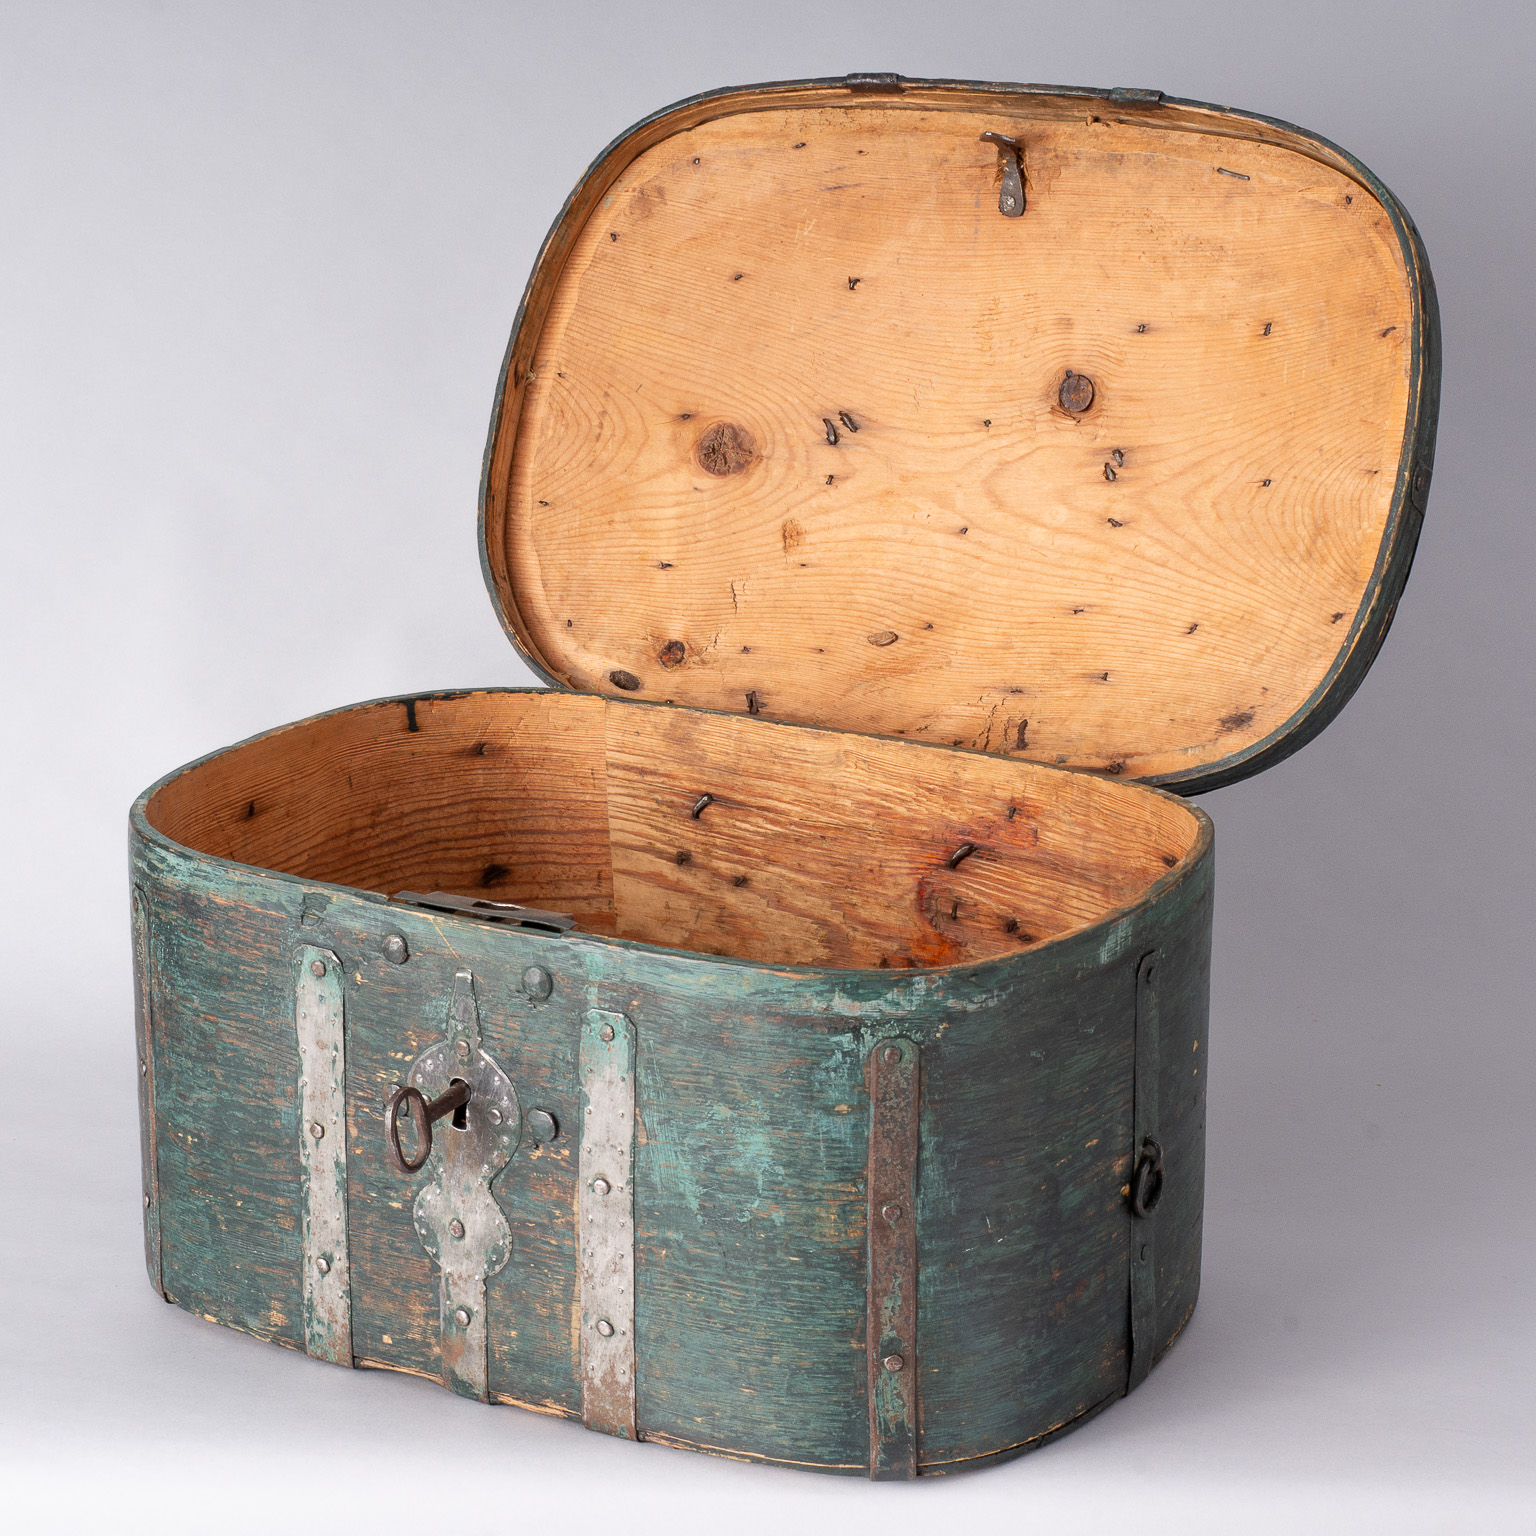 A Travel Box with Old Blue-Green Paint from Northern Sweden C. 1800